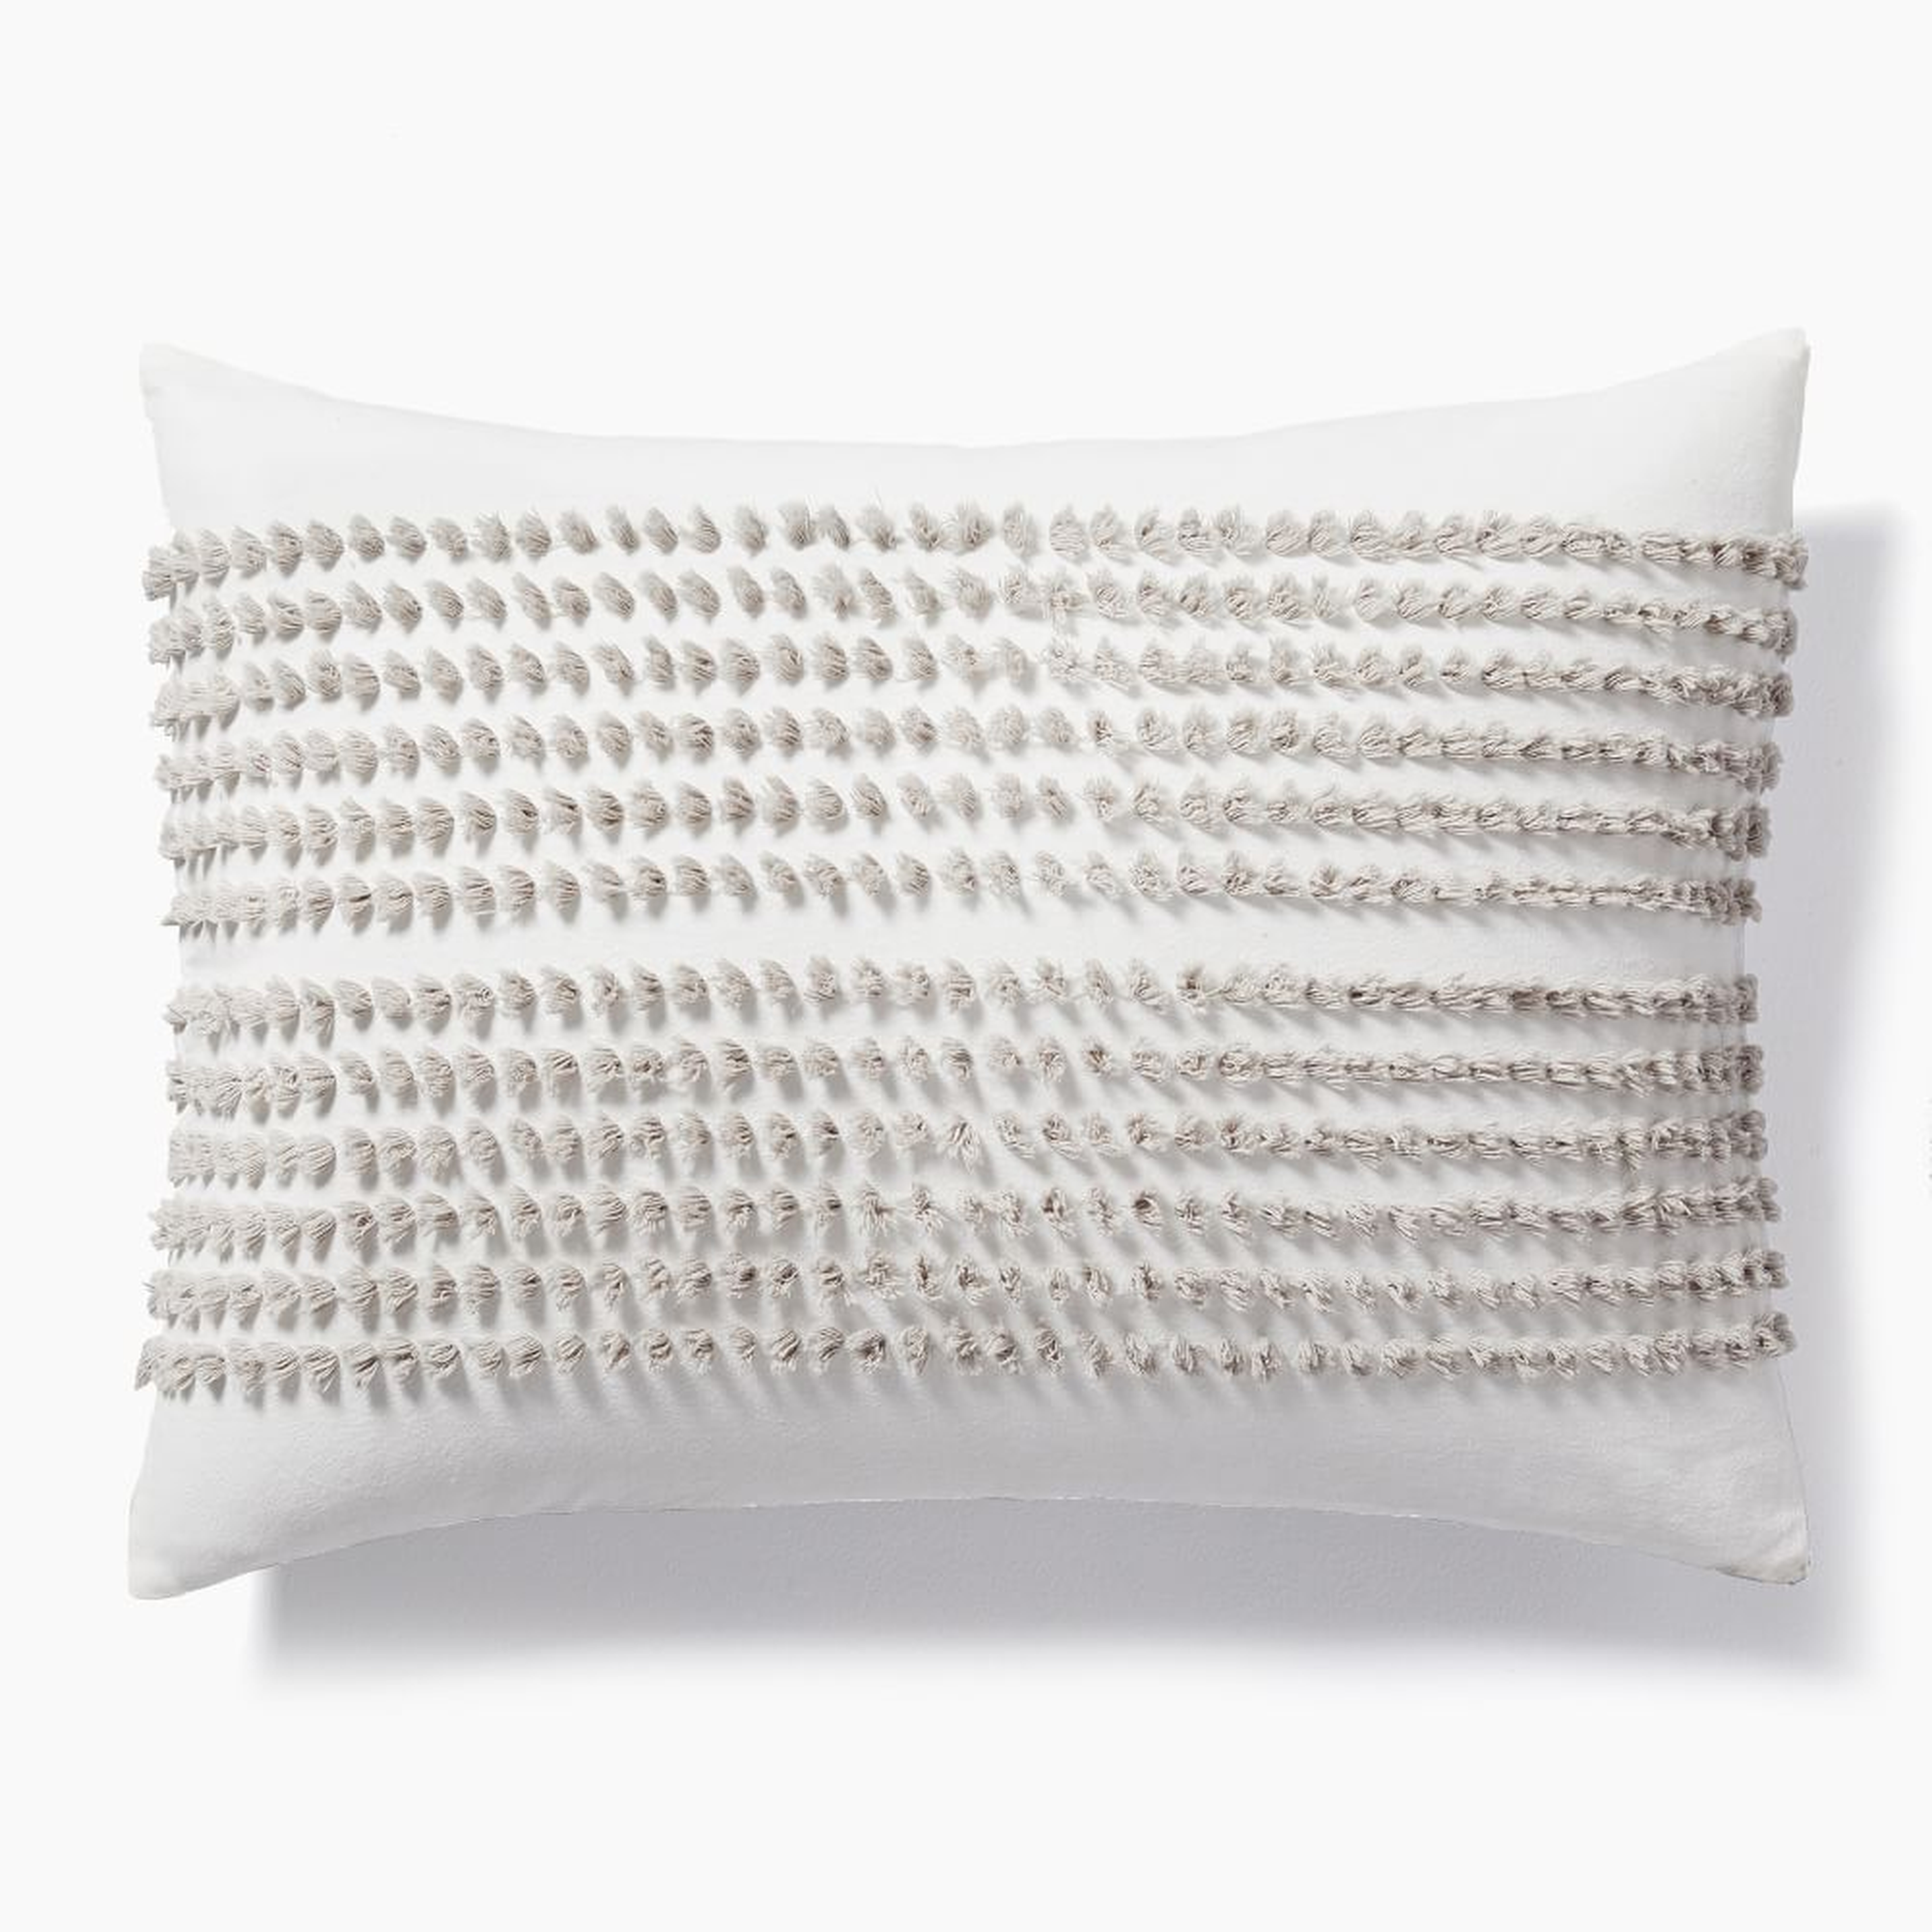 Candlewick King Sham, Pearl Gray & White - West Elm